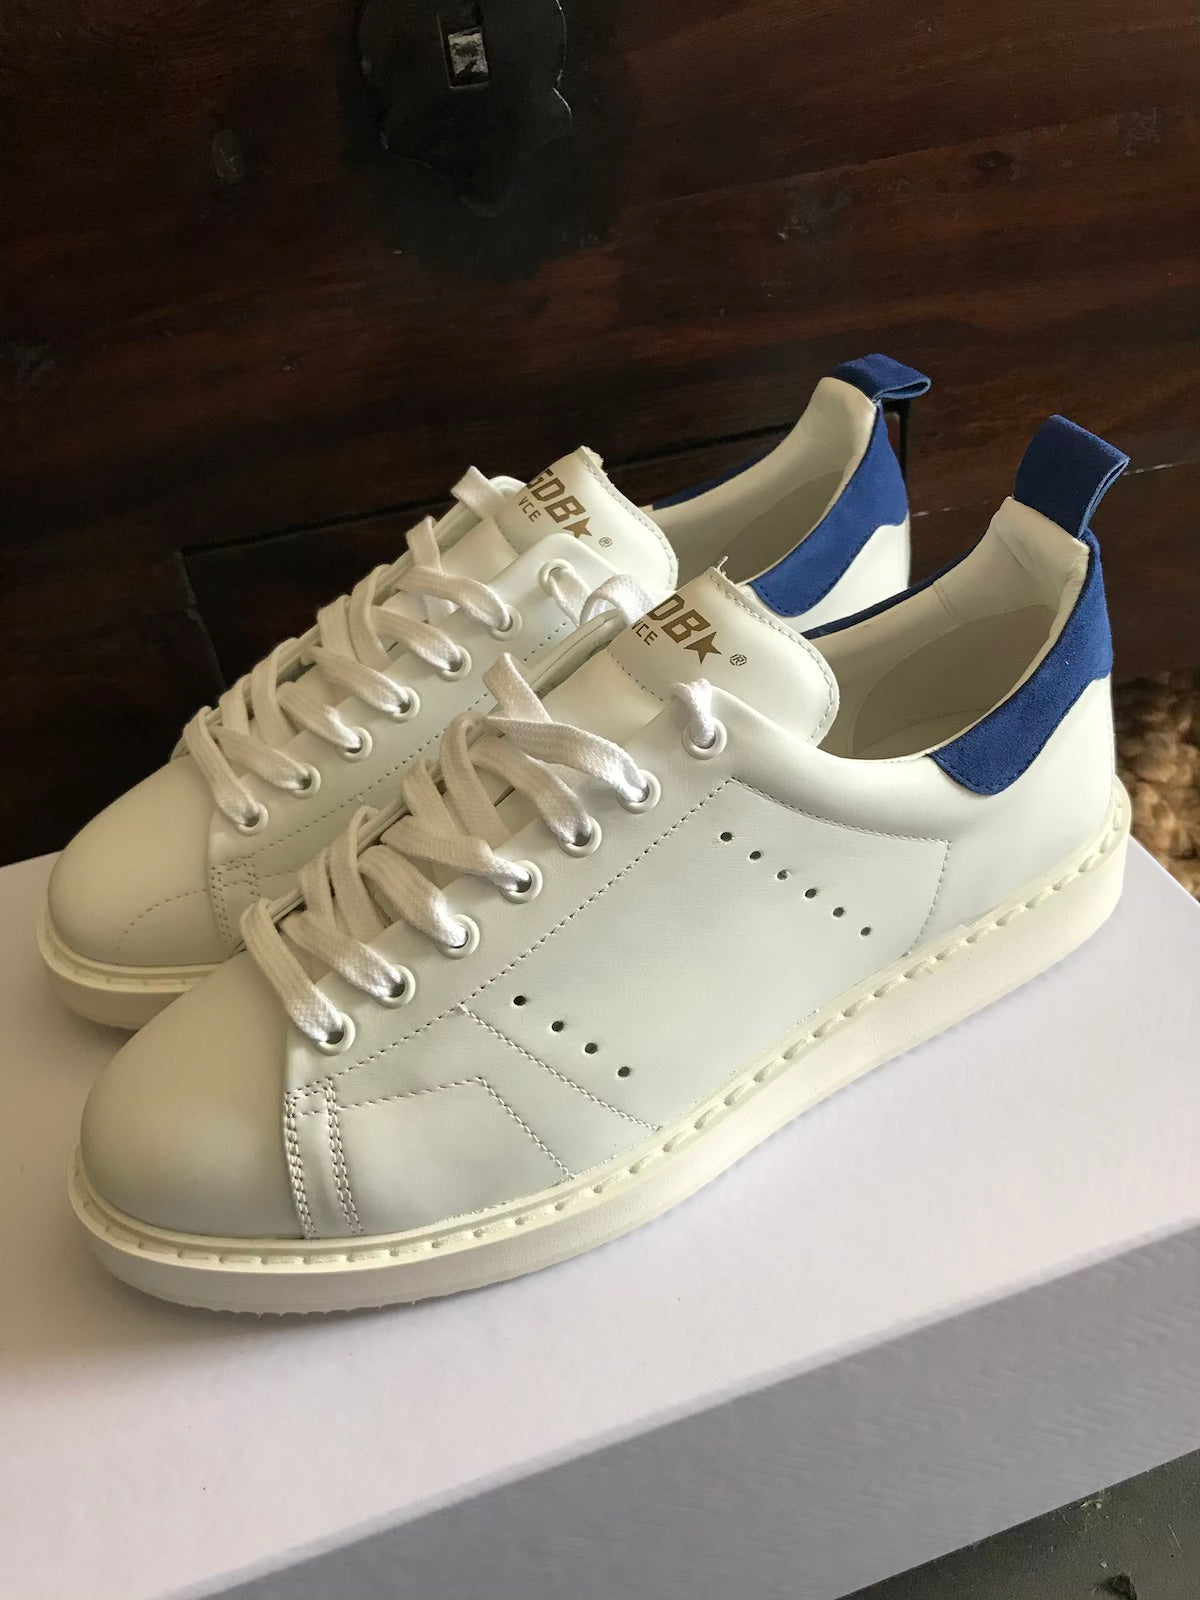 Starter sneakers in leather with navy heel tab